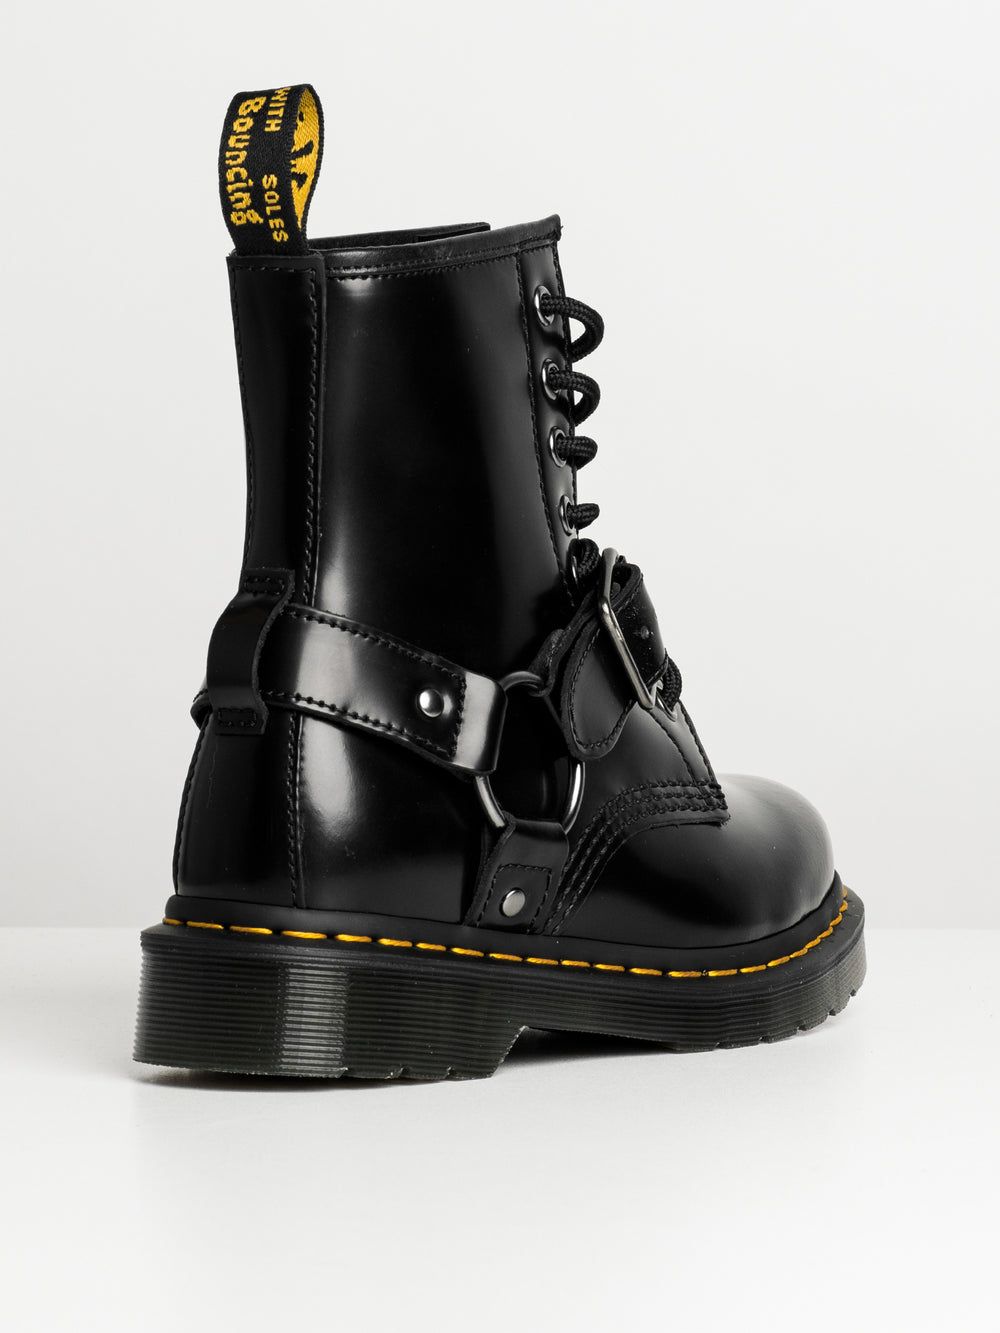 WOMENS DR MARTENS 1460 HARNESS BOOT - CLEARANCE